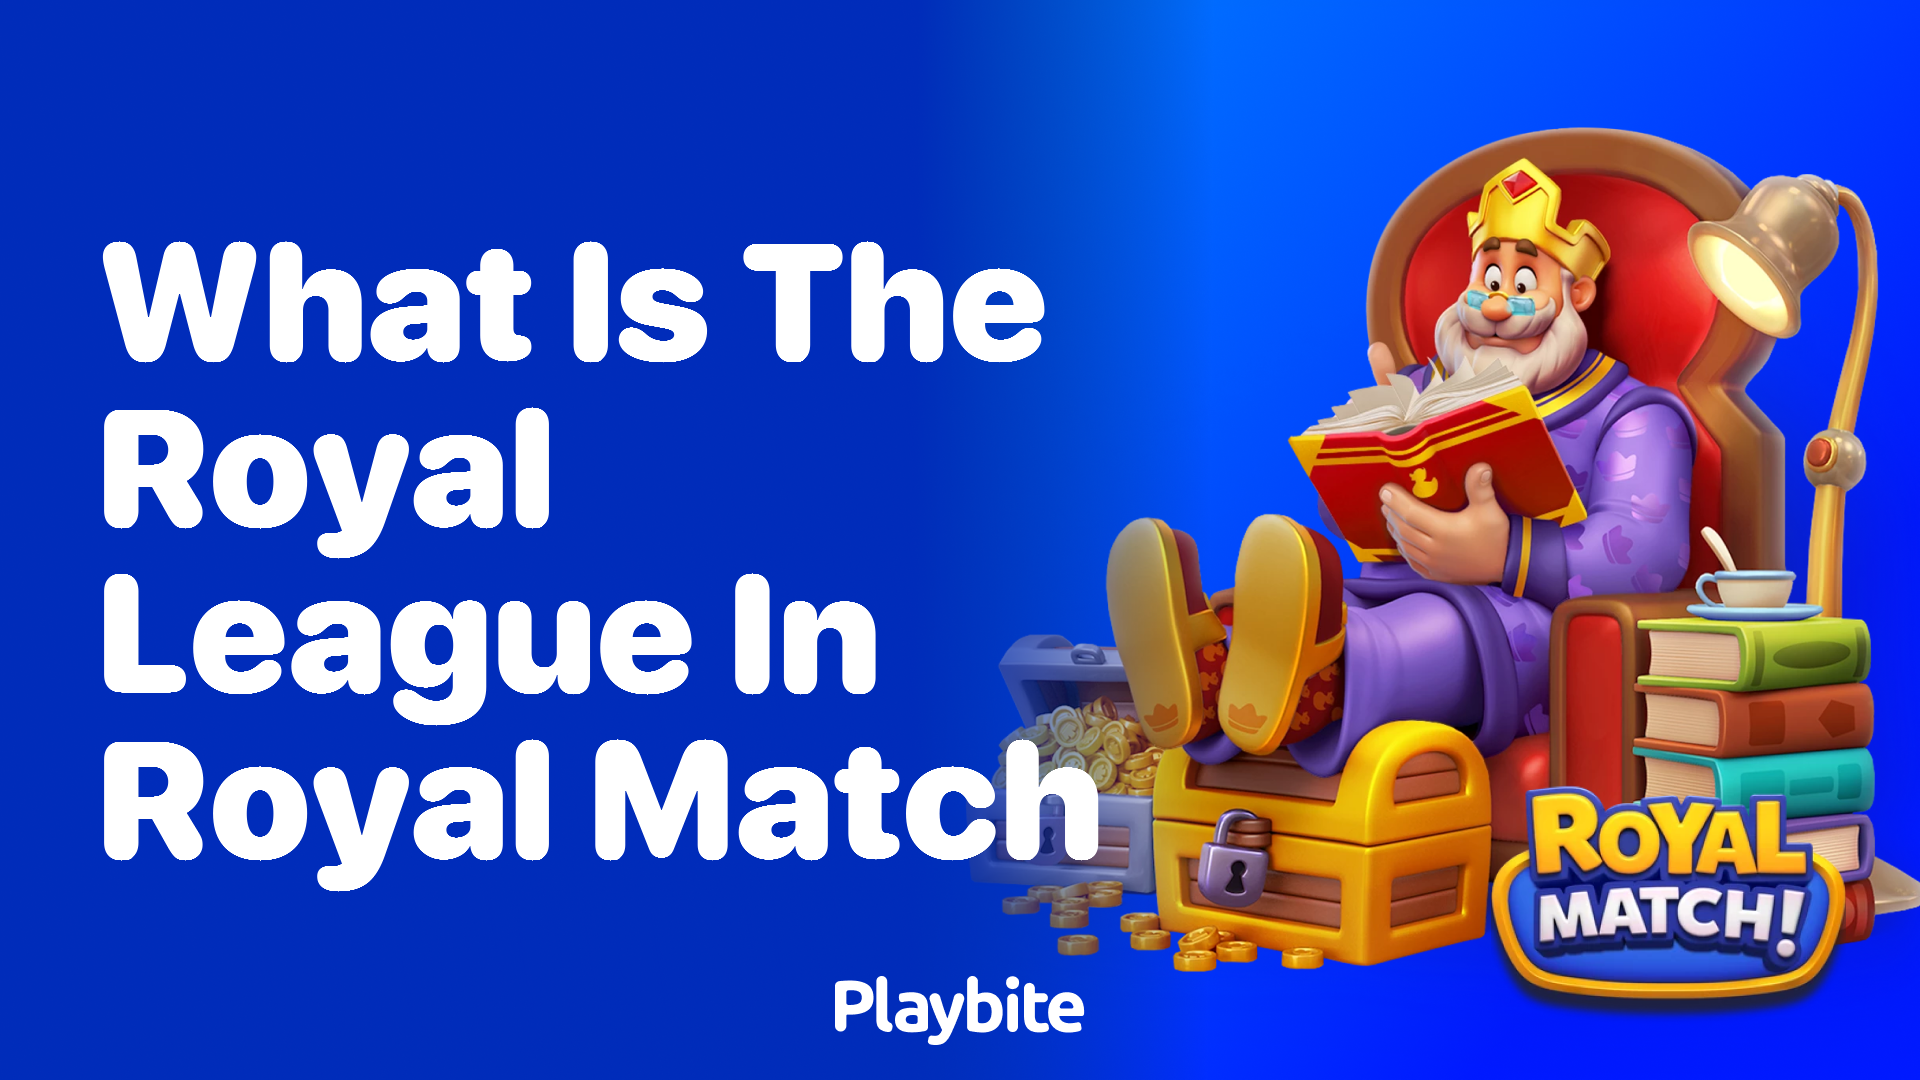 What is the Royal League in Royal Match?